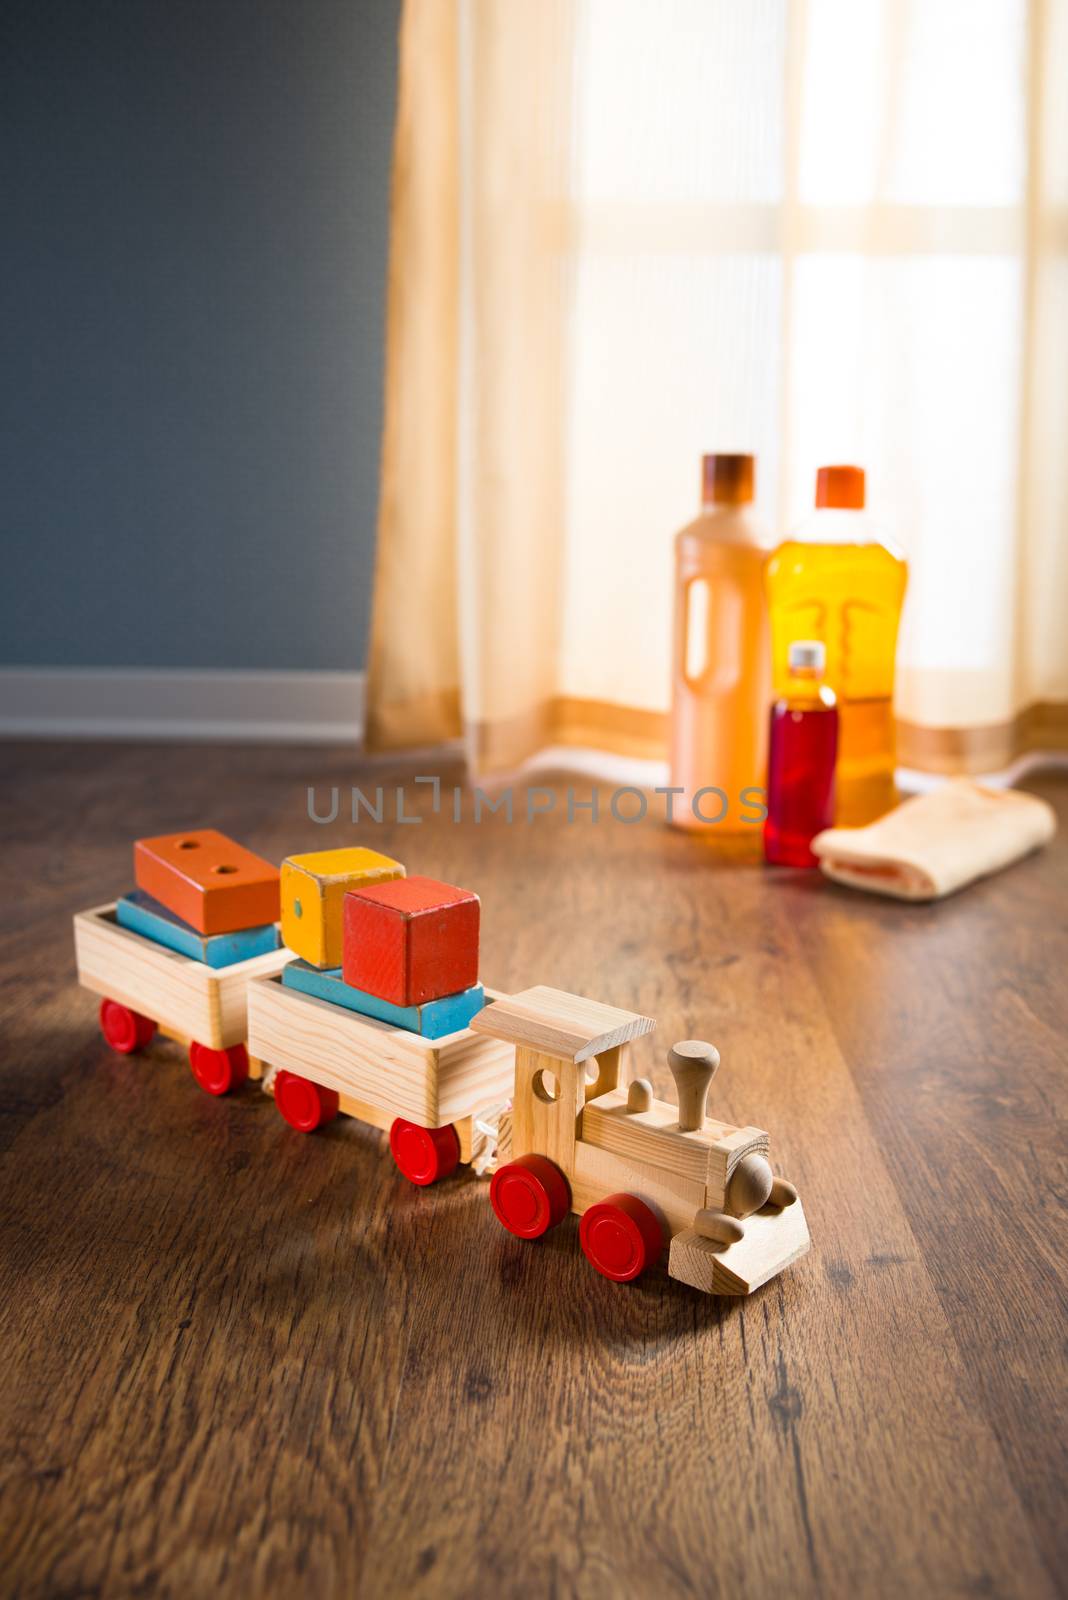 Wooden toy train with wood cleaner products on parquet next to a window.